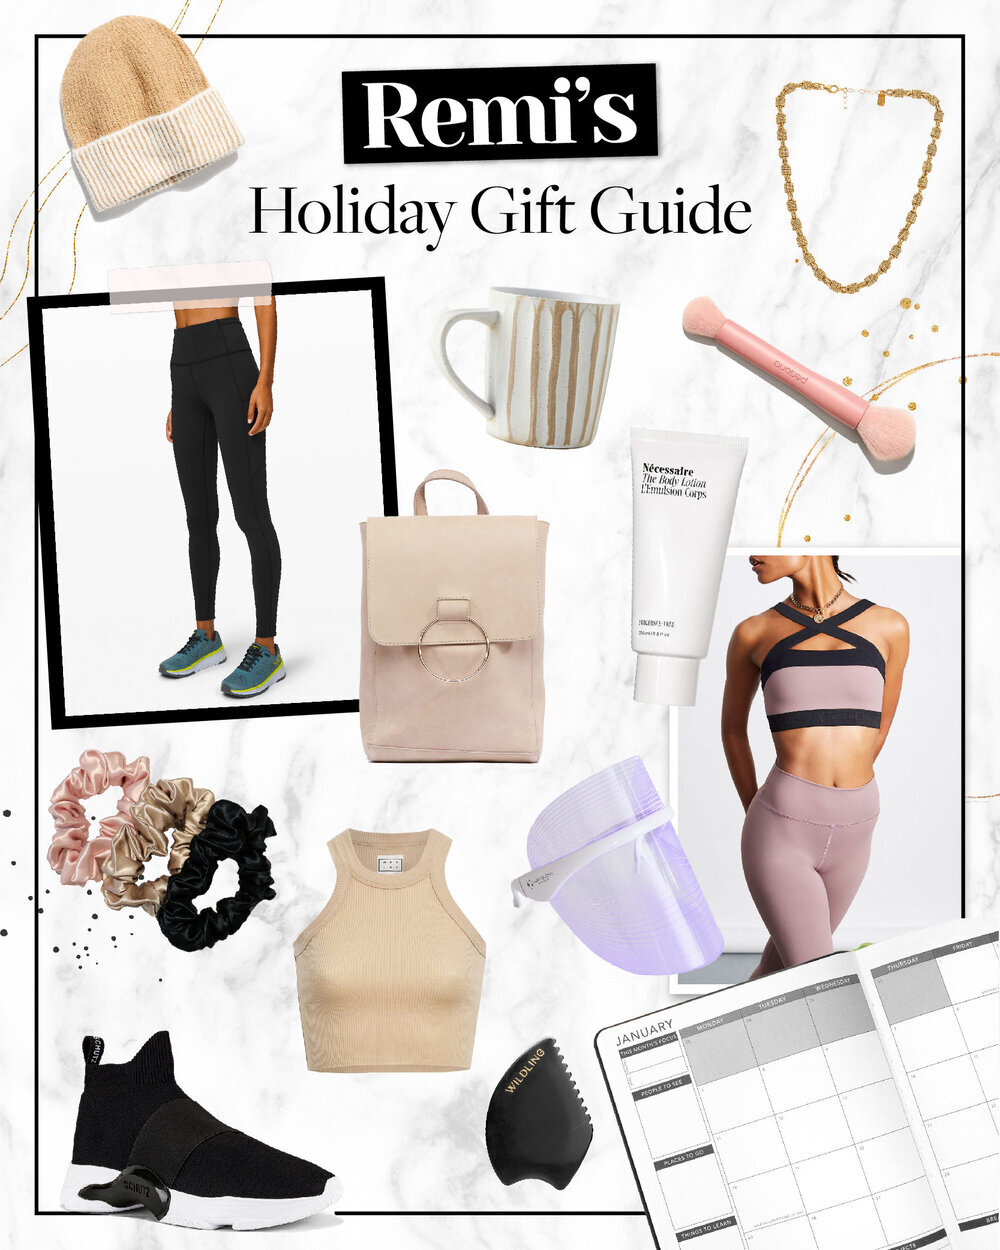 Holiday Gift Guide 2020: Best Gifts for Her